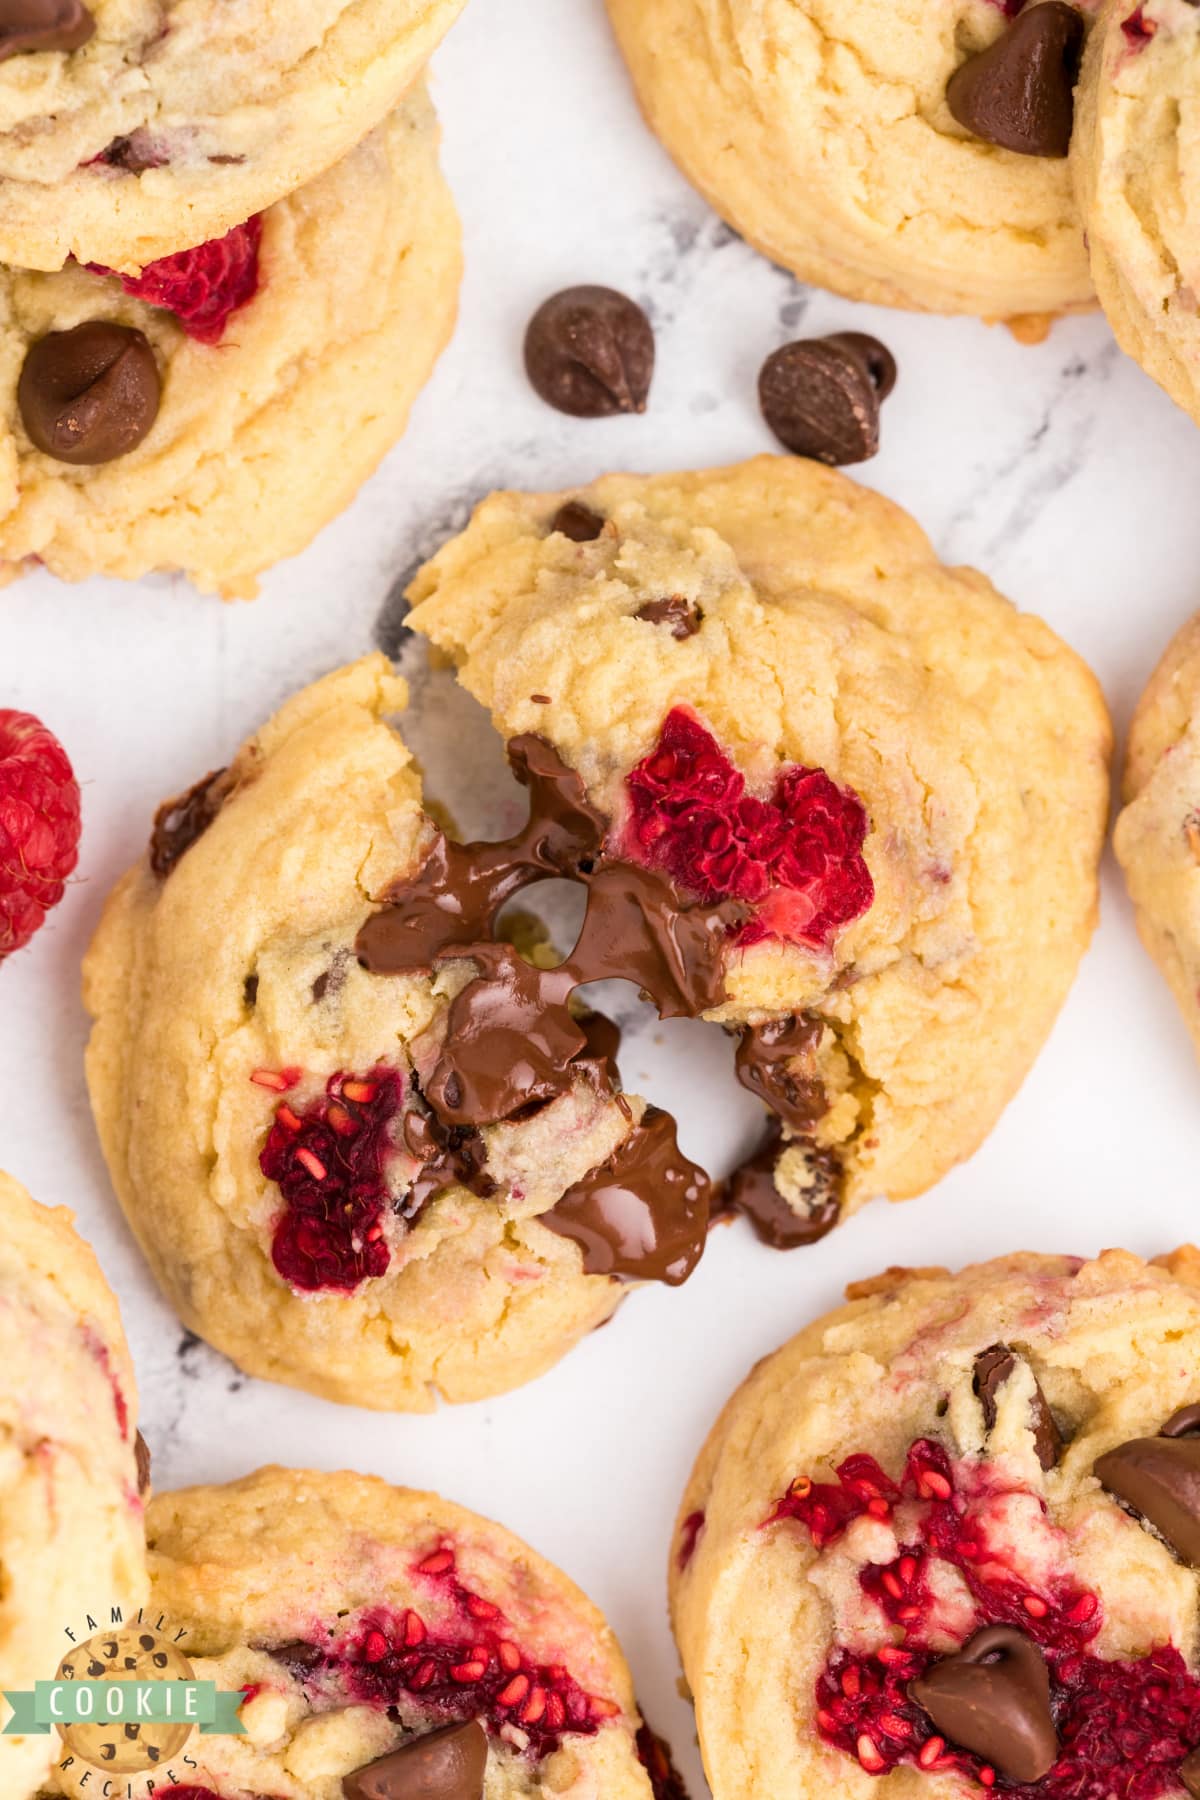 Delicious chocolate chip cookie recipe with raspberries